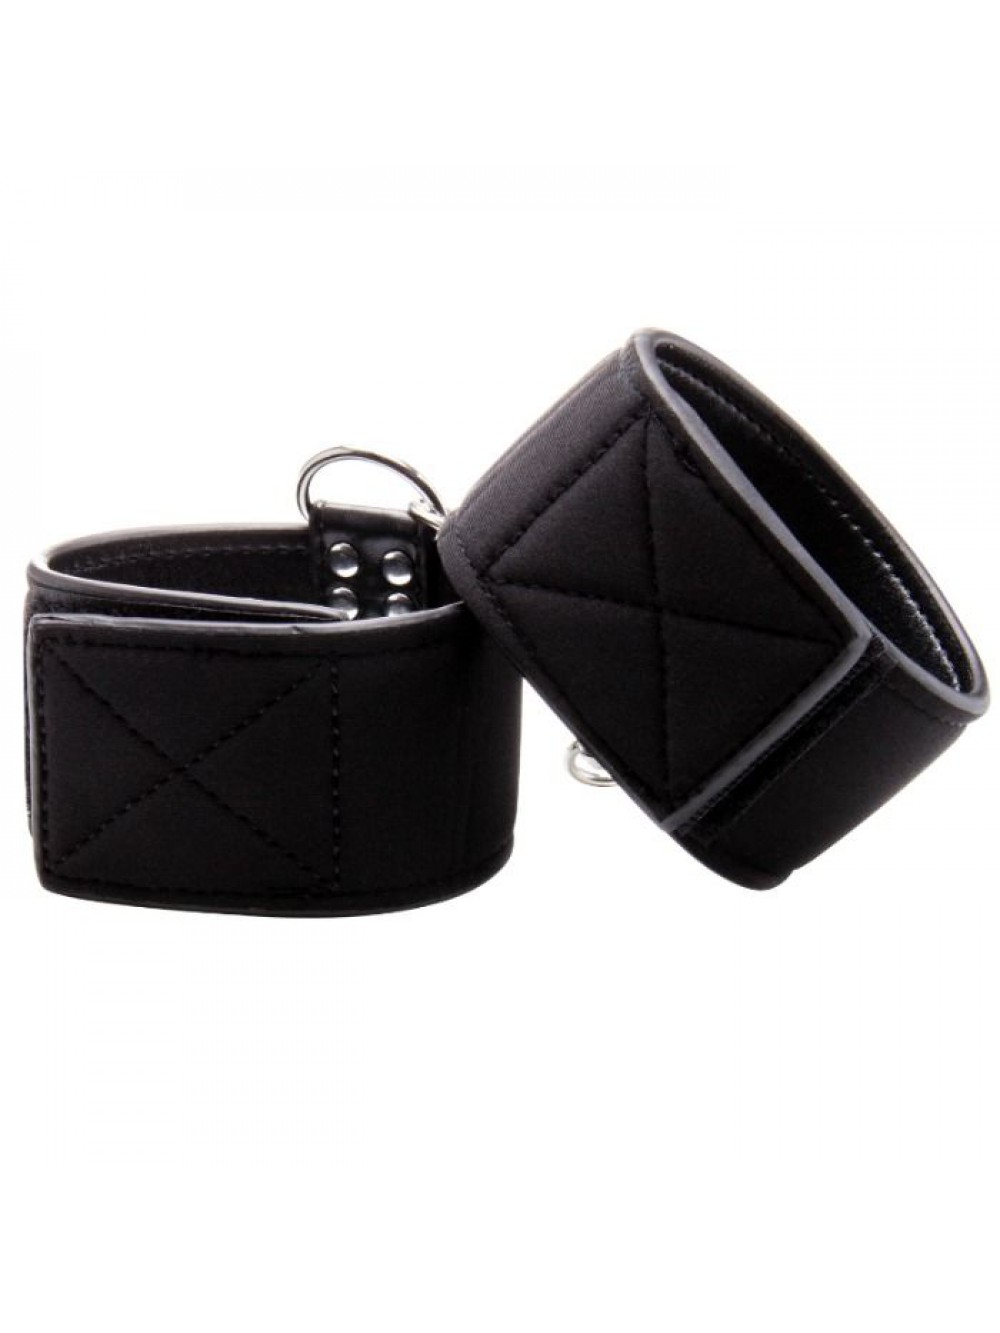 REVERSIBLE ANKLE CUFFS - BLACK